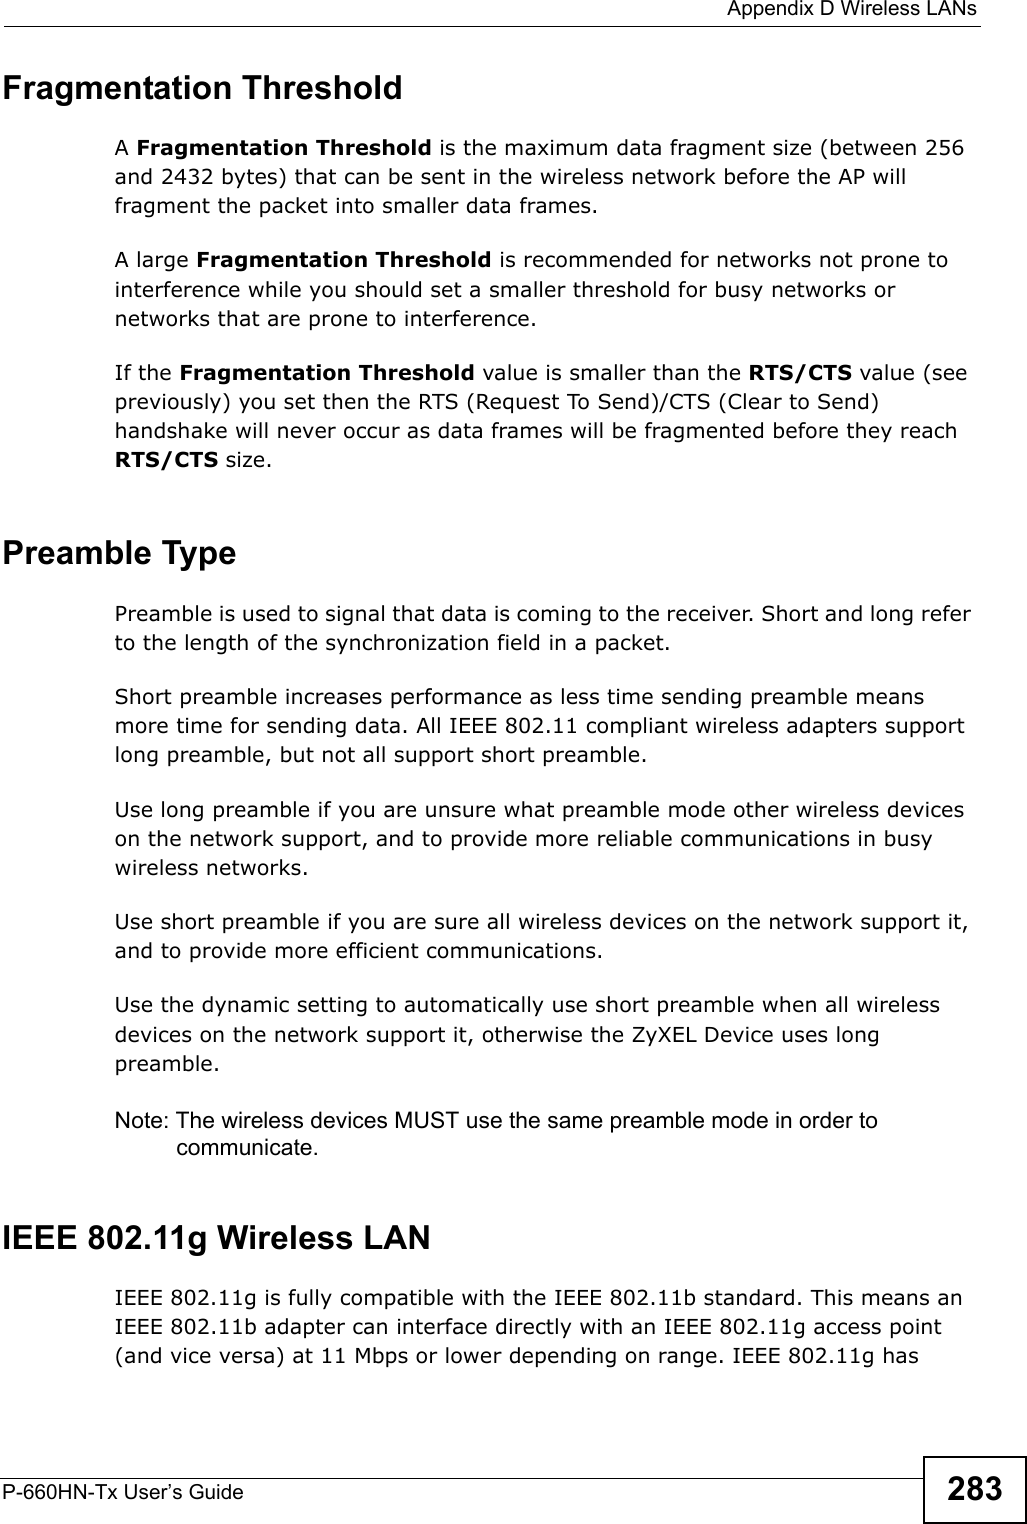  Appendix D Wireless LANsP-660HN-Tx User’s Guide 283Fragmentation ThresholdA Fragmentation Threshold is the maximum data fragment size (between 256 and 2432 bytes) that can be sent in the wireless network before the AP will fragment the packet into smaller data frames.A large Fragmentation Threshold is recommended for networks not prone to interference while you should set a smaller threshold for busy networks or networks that are prone to interference.If the Fragmentation Threshold value is smaller than the RTS/CTS value (see previously) you set then the RTS (Request To Send)/CTS (Clear to Send) handshake will never occur as data frames will be fragmented before they reach RTS/CTS size.Preamble TypePreamble is used to signal that data is coming to the receiver. Short and long refer to the length of the synchronization field in a packet.Short preamble increases performance as less time sending preamble means more time for sending data. All IEEE 802.11 compliant wireless adapters support long preamble, but not all support short preamble. Use long preamble if you are unsure what preamble mode other wireless devices on the network support, and to provide more reliable communications in busy wireless networks. Use short preamble if you are sure all wireless devices on the network support it, and to provide more efficient communications.Use the dynamic setting to automatically use short preamble when all wireless devices on the network support it, otherwise the ZyXEL Device uses long preamble.Note: The wireless devices MUST use the same preamble mode in order to communicate.IEEE 802.11g Wireless LANIEEE 802.11g is fully compatible with the IEEE 802.11b standard. This means an IEEE 802.11b adapter can interface directly with an IEEE 802.11g access point (and vice versa) at 11 Mbps or lower depending on range. IEEE 802.11g has 